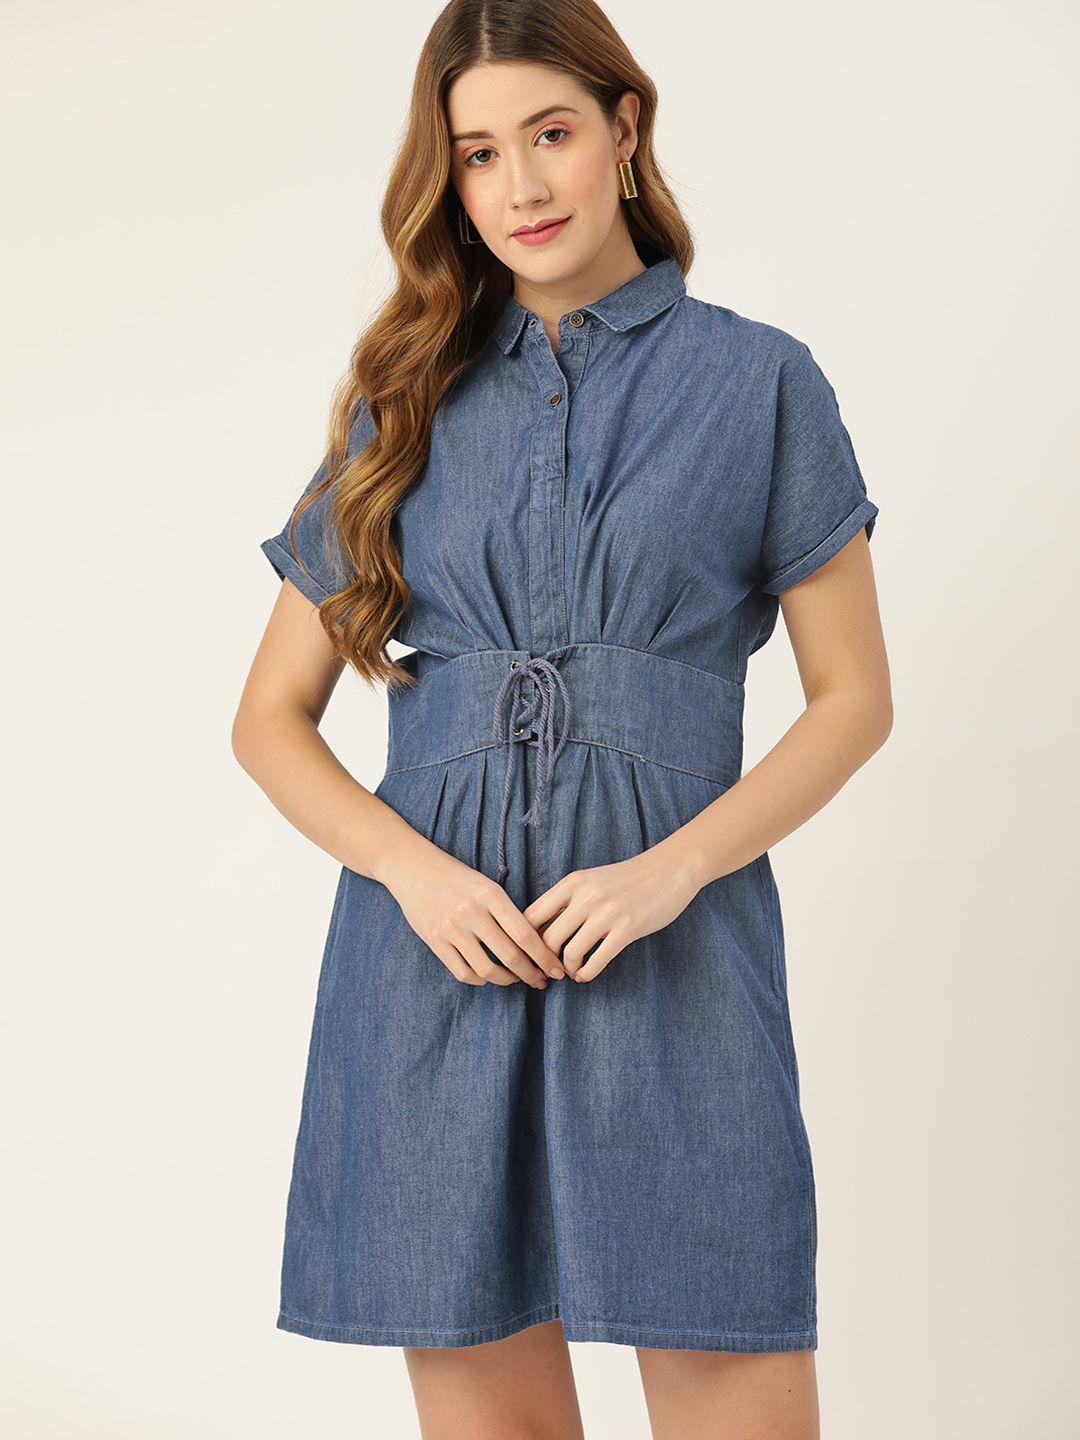 dressberry-women-navy-blue-solid-pure-cotton-a-line-chambray-dress